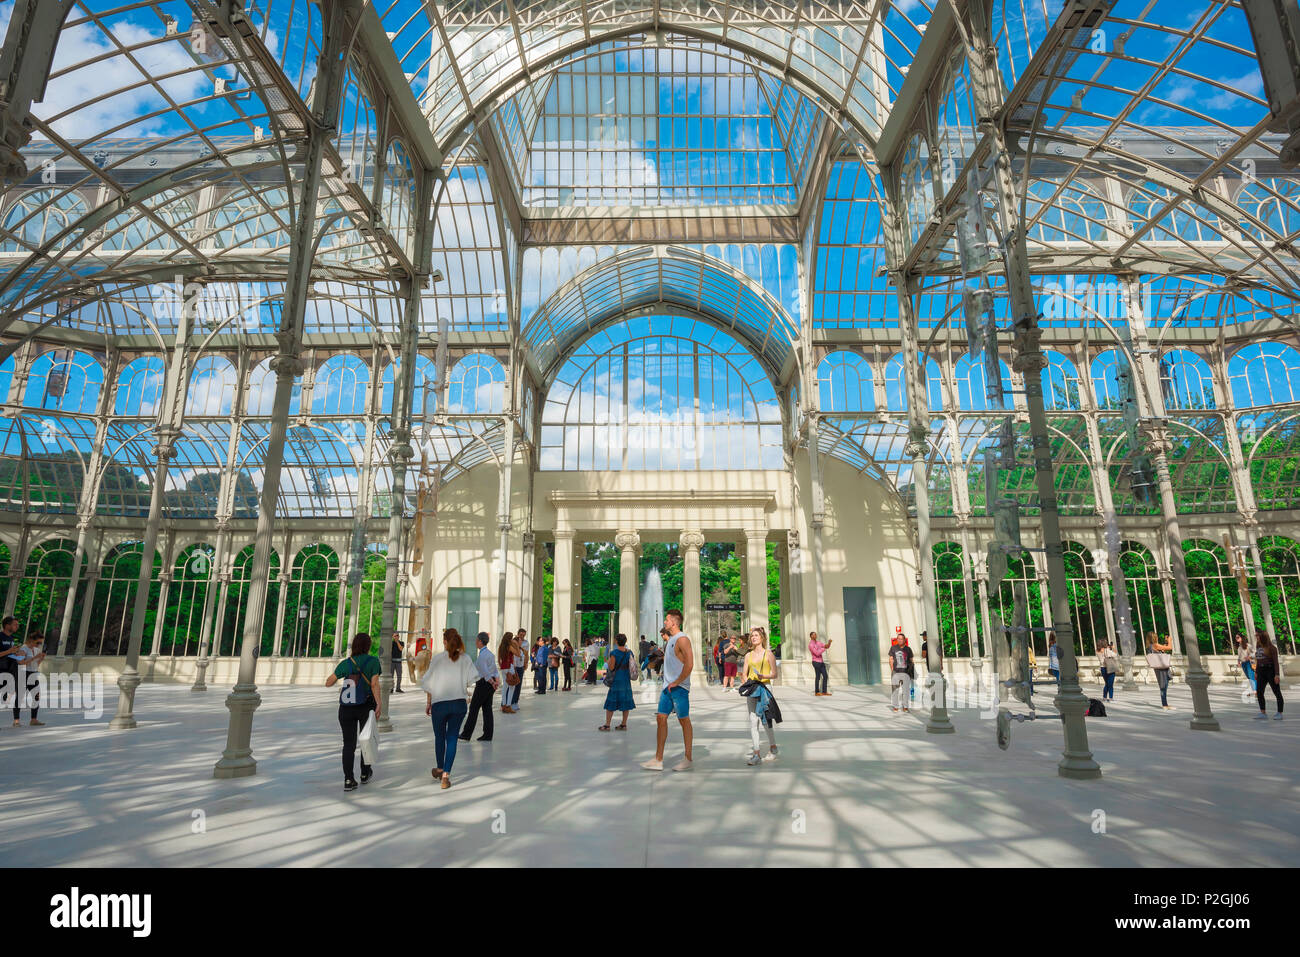 Madrid Retiro Crystal Palace, interior view of the Palacio de Cristal - a glass and wrought iron building in the Parque del Retiro in Madrid, Spain. Stock Photo